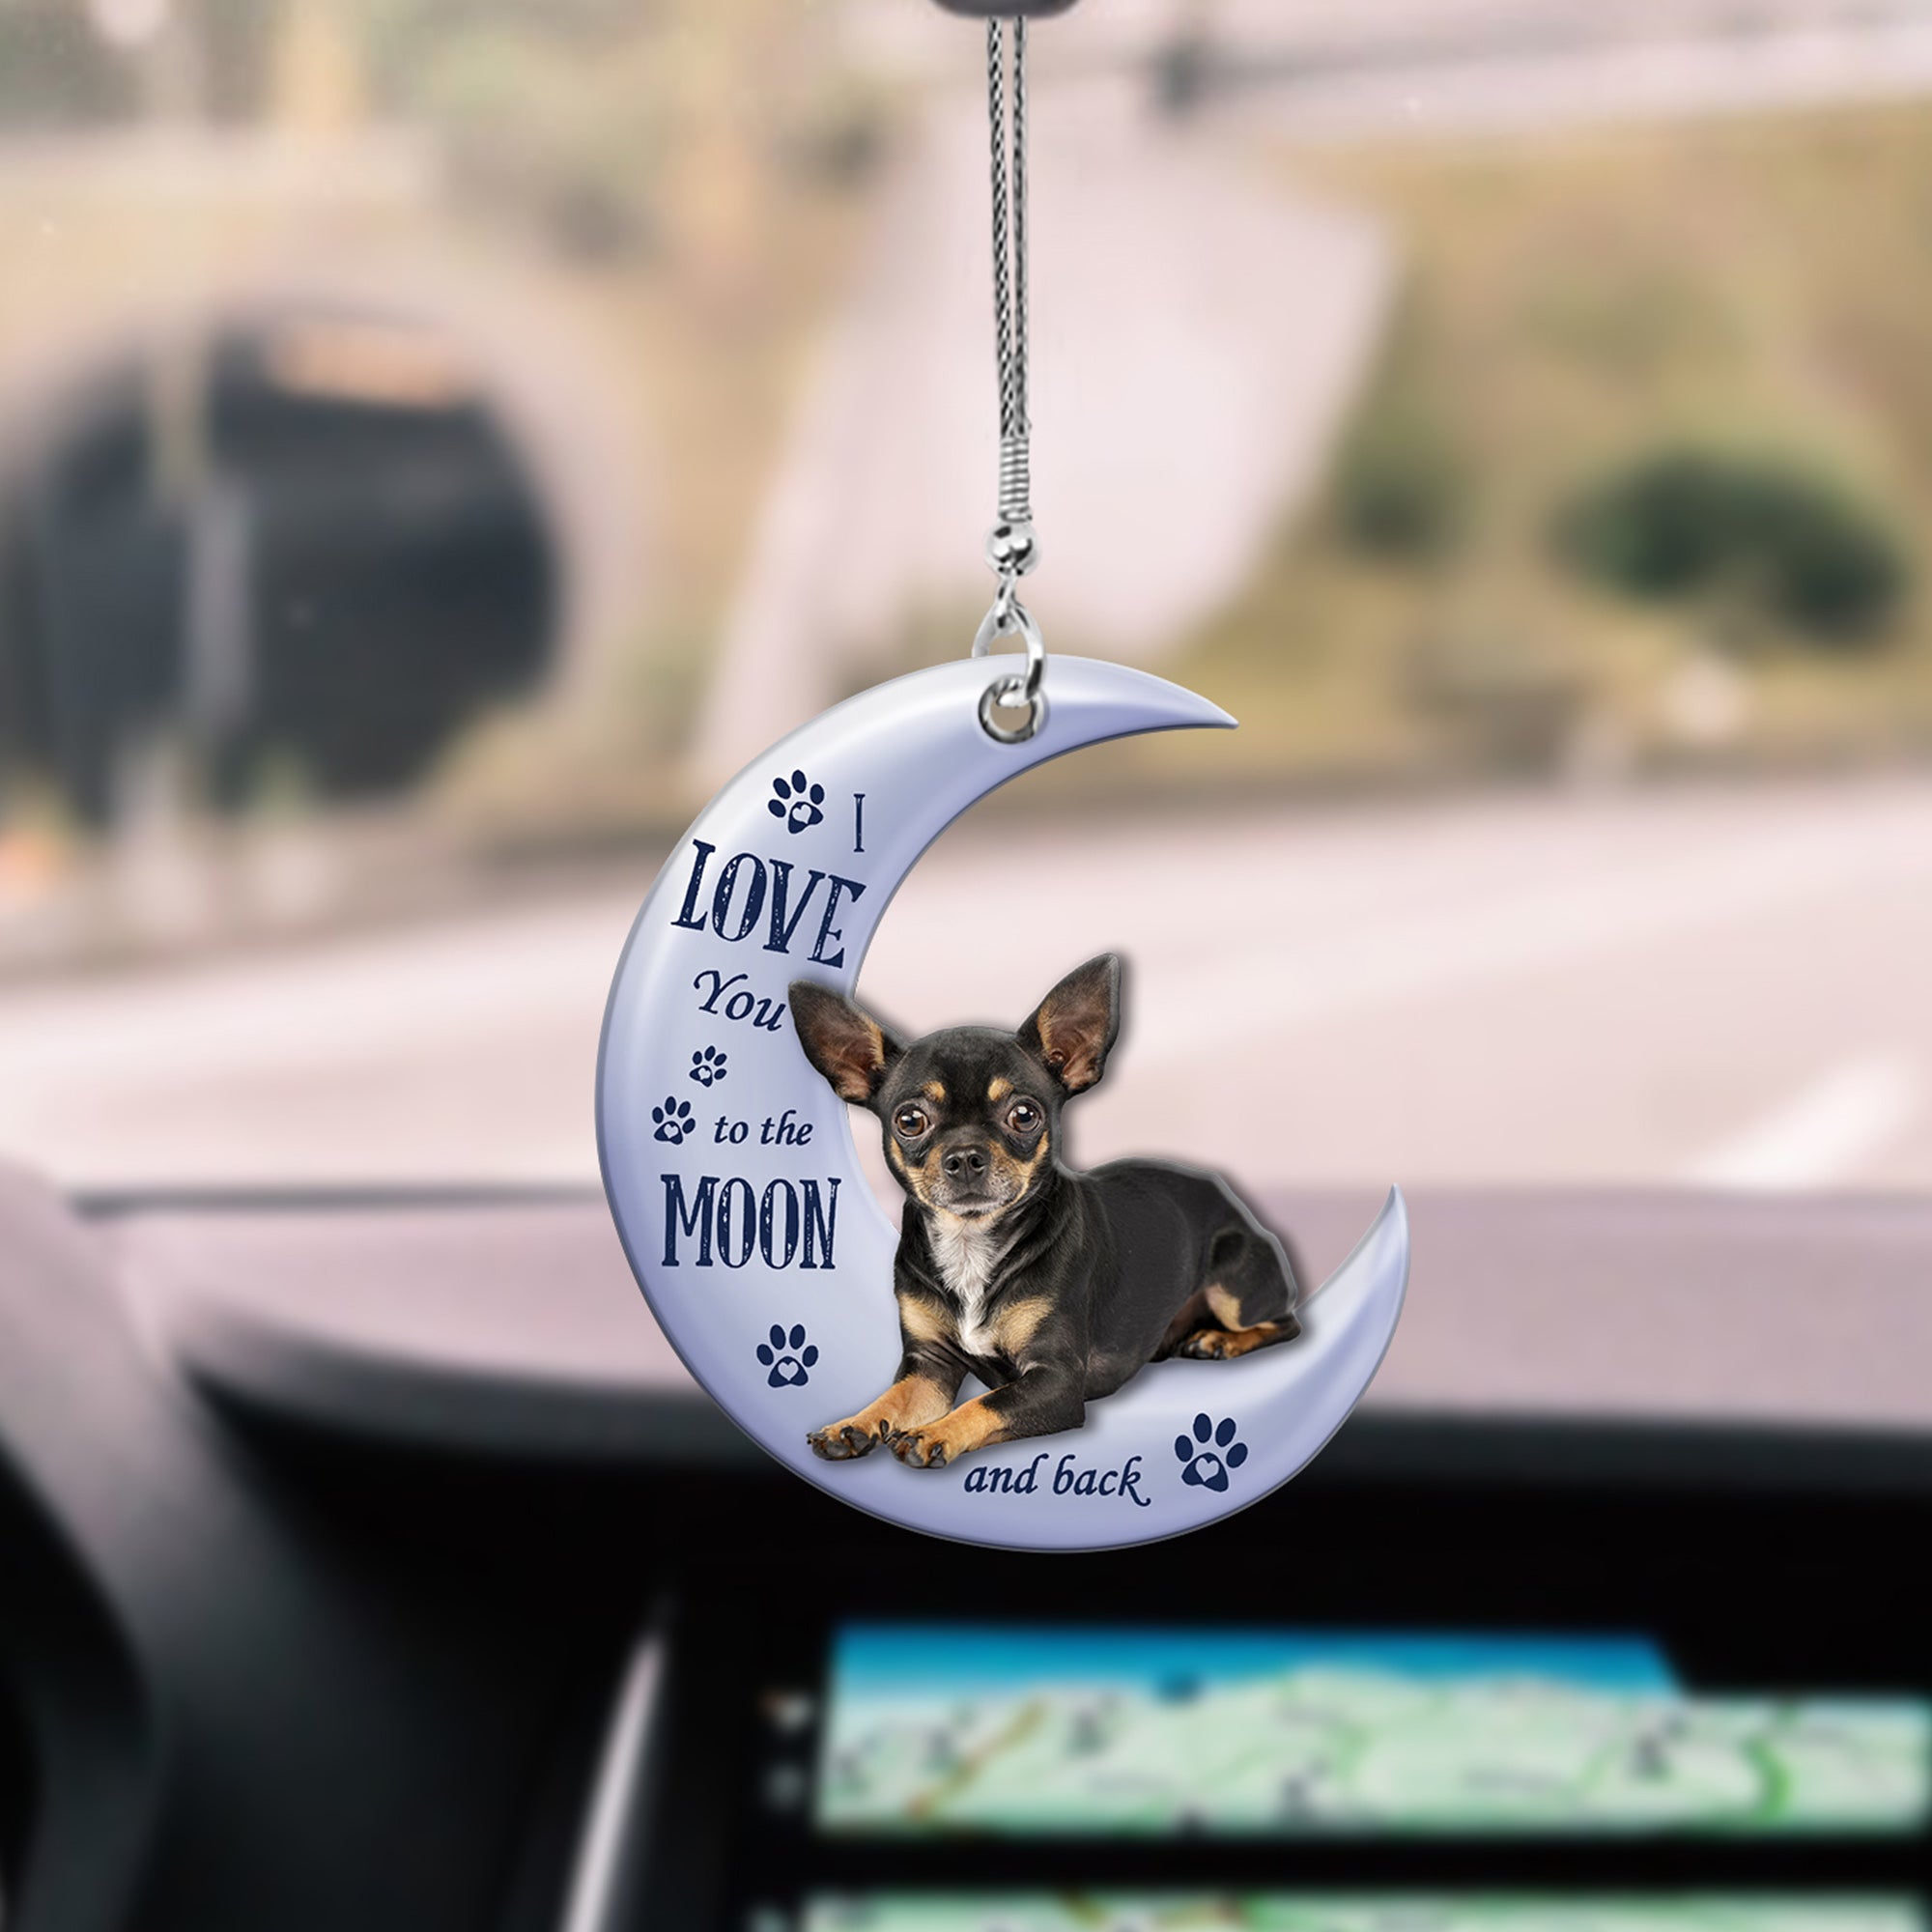 Chihuahua Car Hanging Ornament Love You To The Moon And Back - Car Hanging Ornament Pet Teezalo